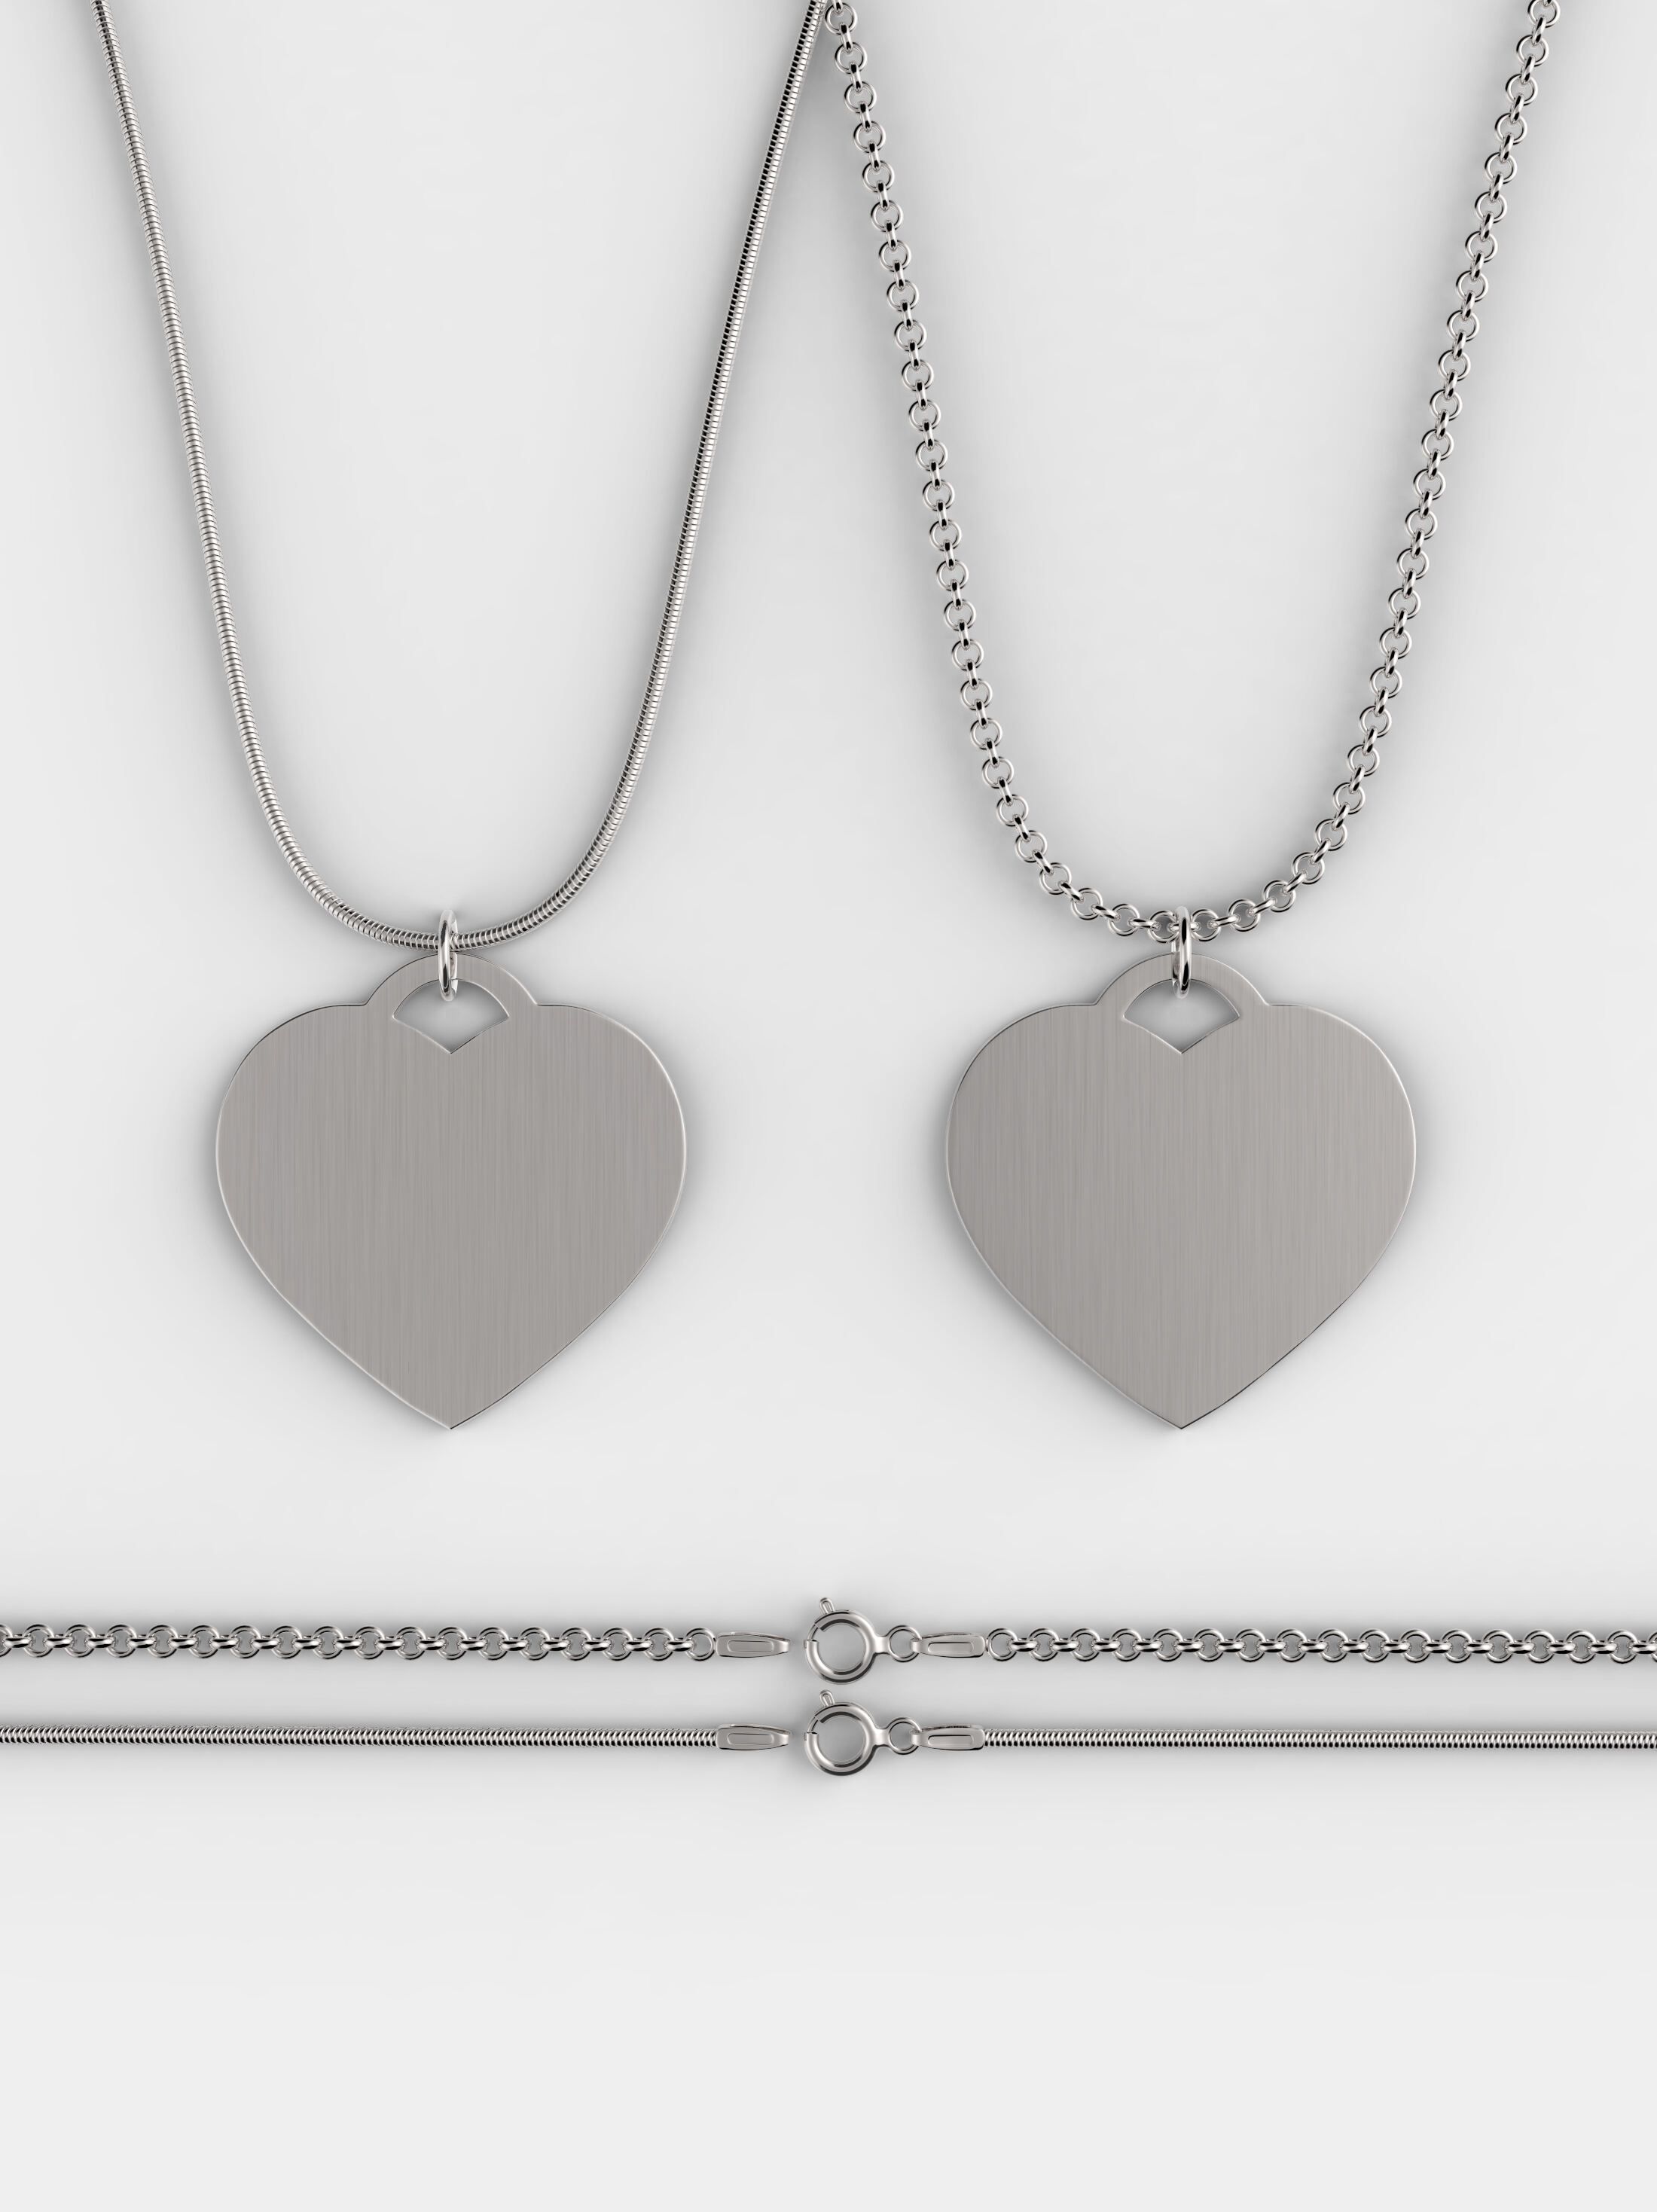 custom heart necklace chain options